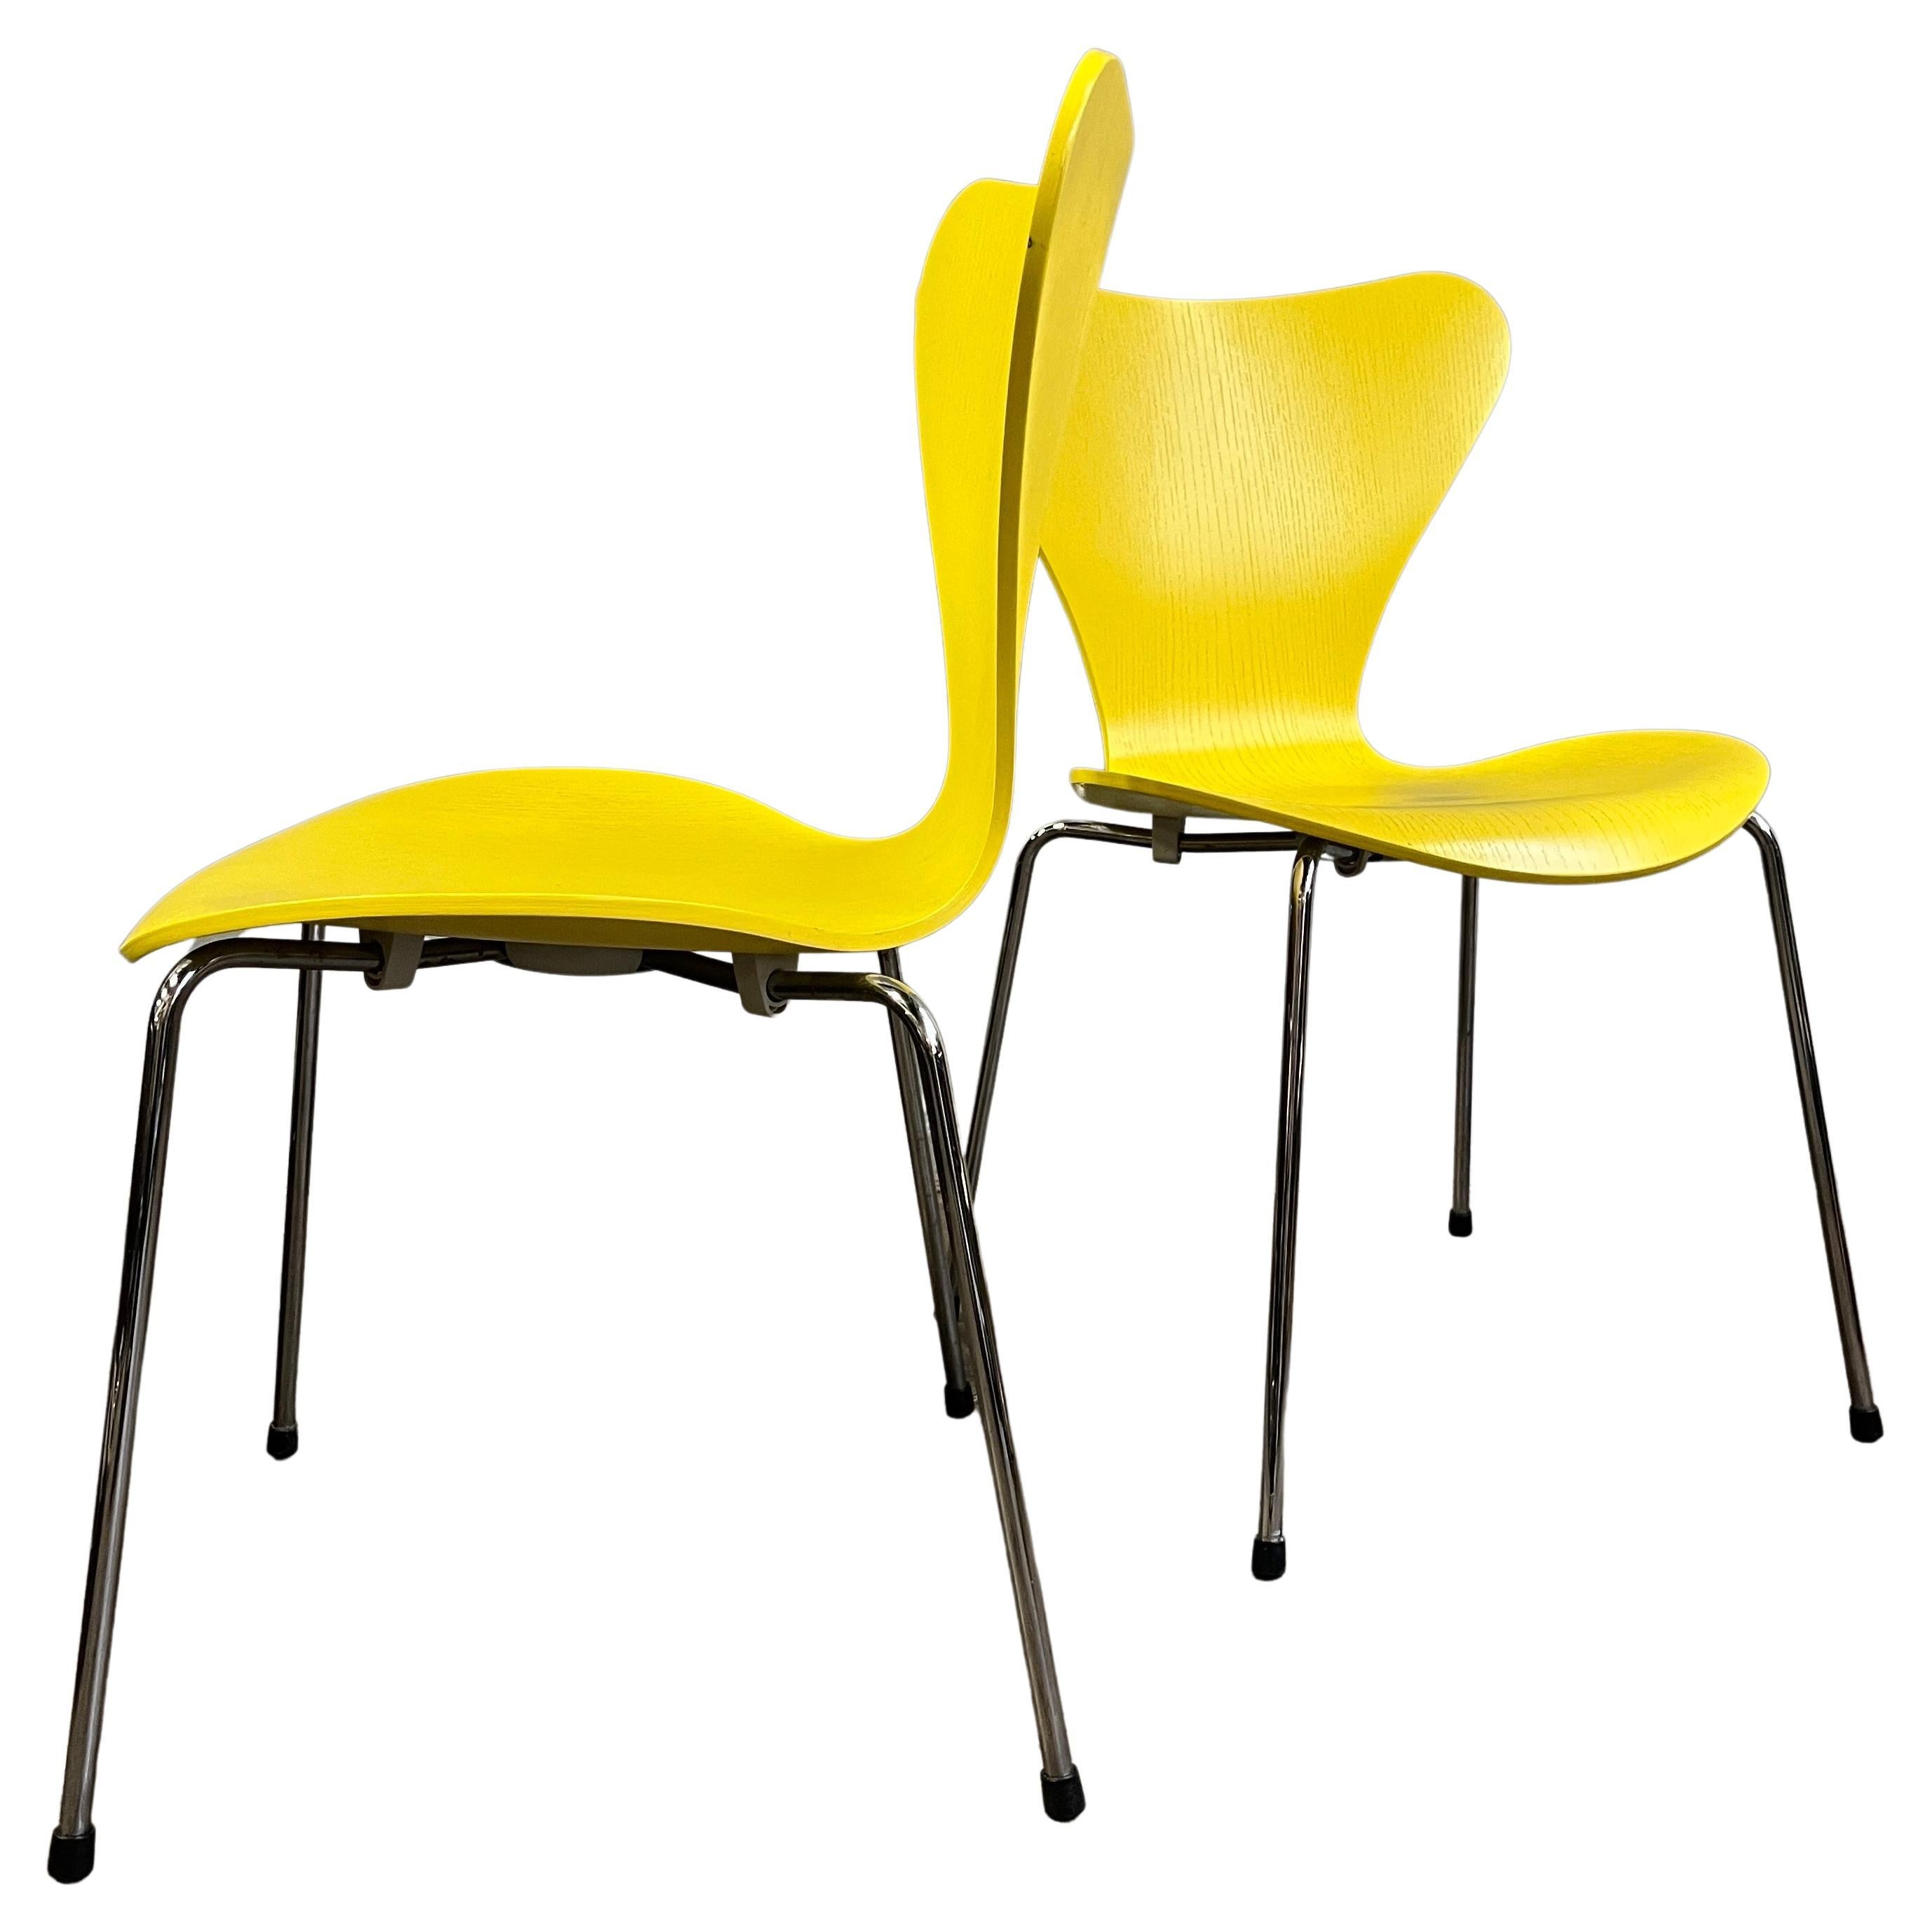 Midcentury Arne Jacobsen Series 7 Chairs Sunny Yellow For Sale